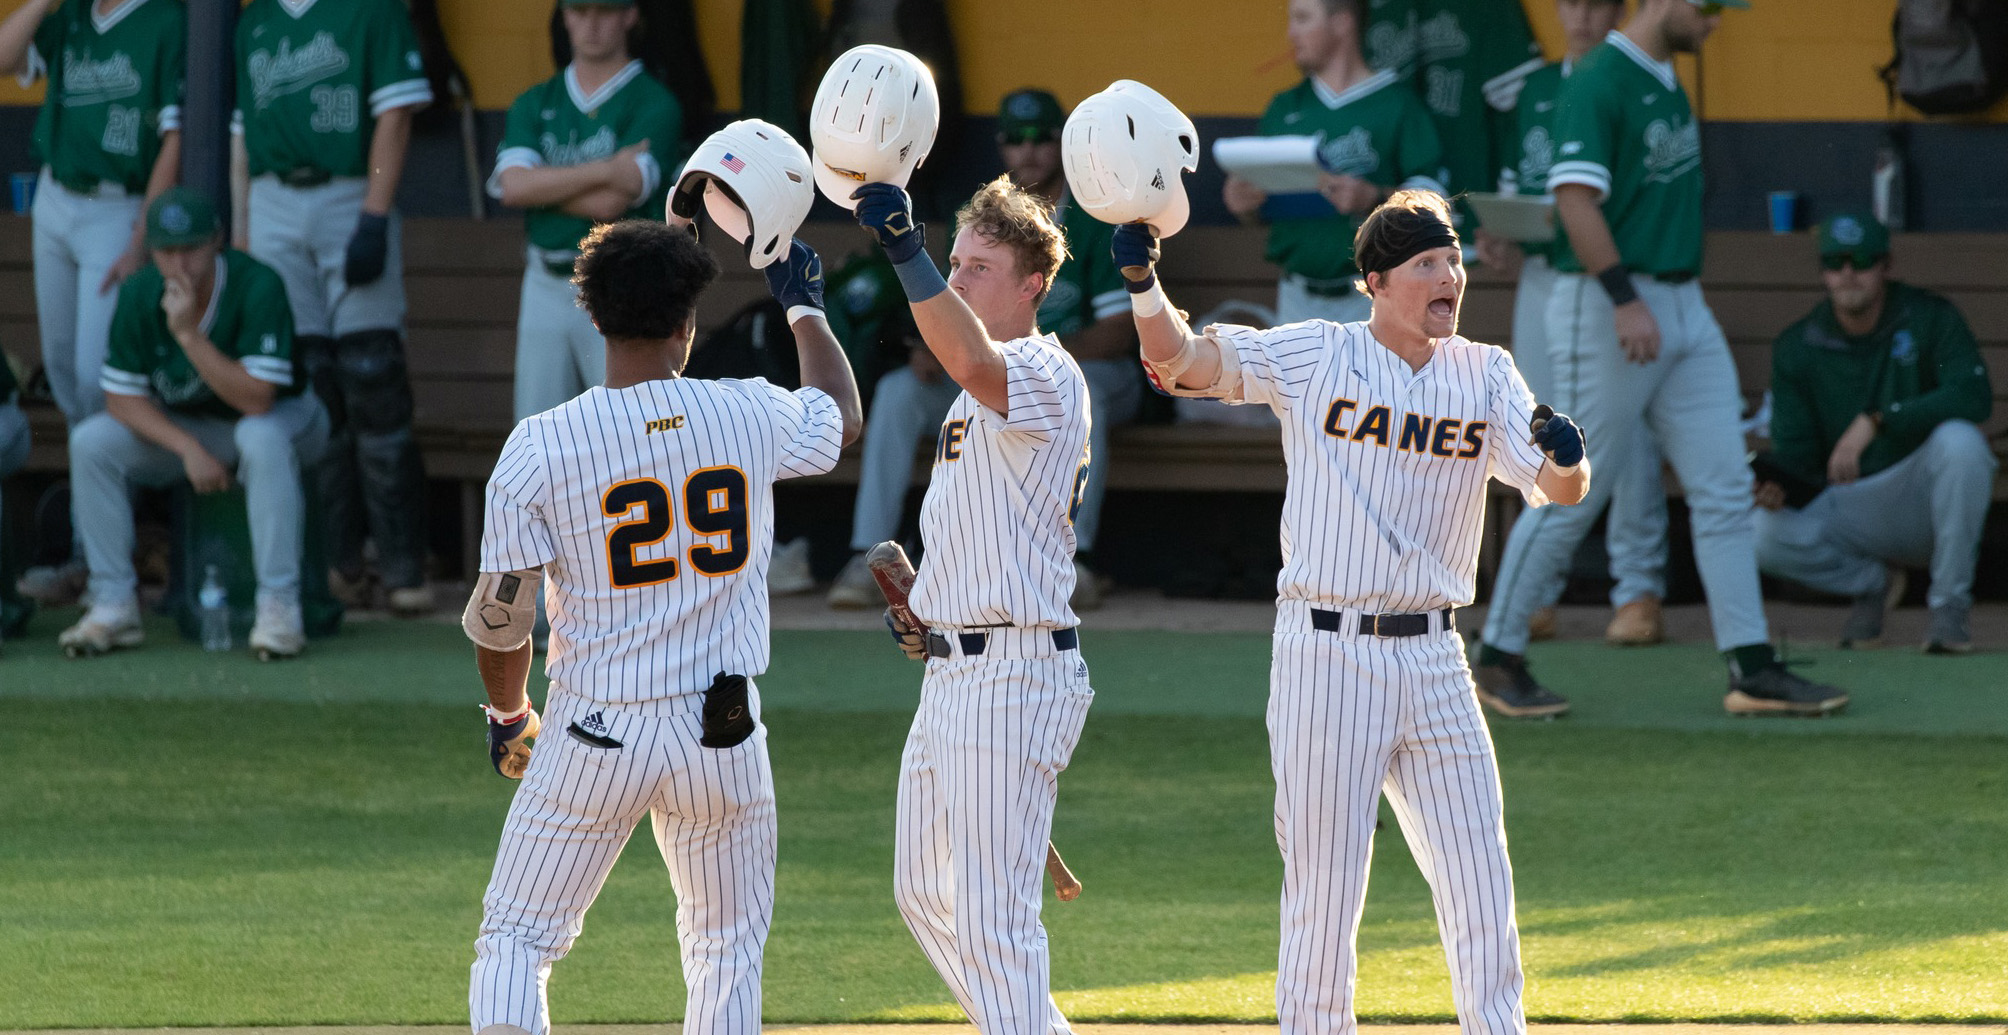 8 and Over; Canes Notch Consecutive Victories Over Ranked Opponents